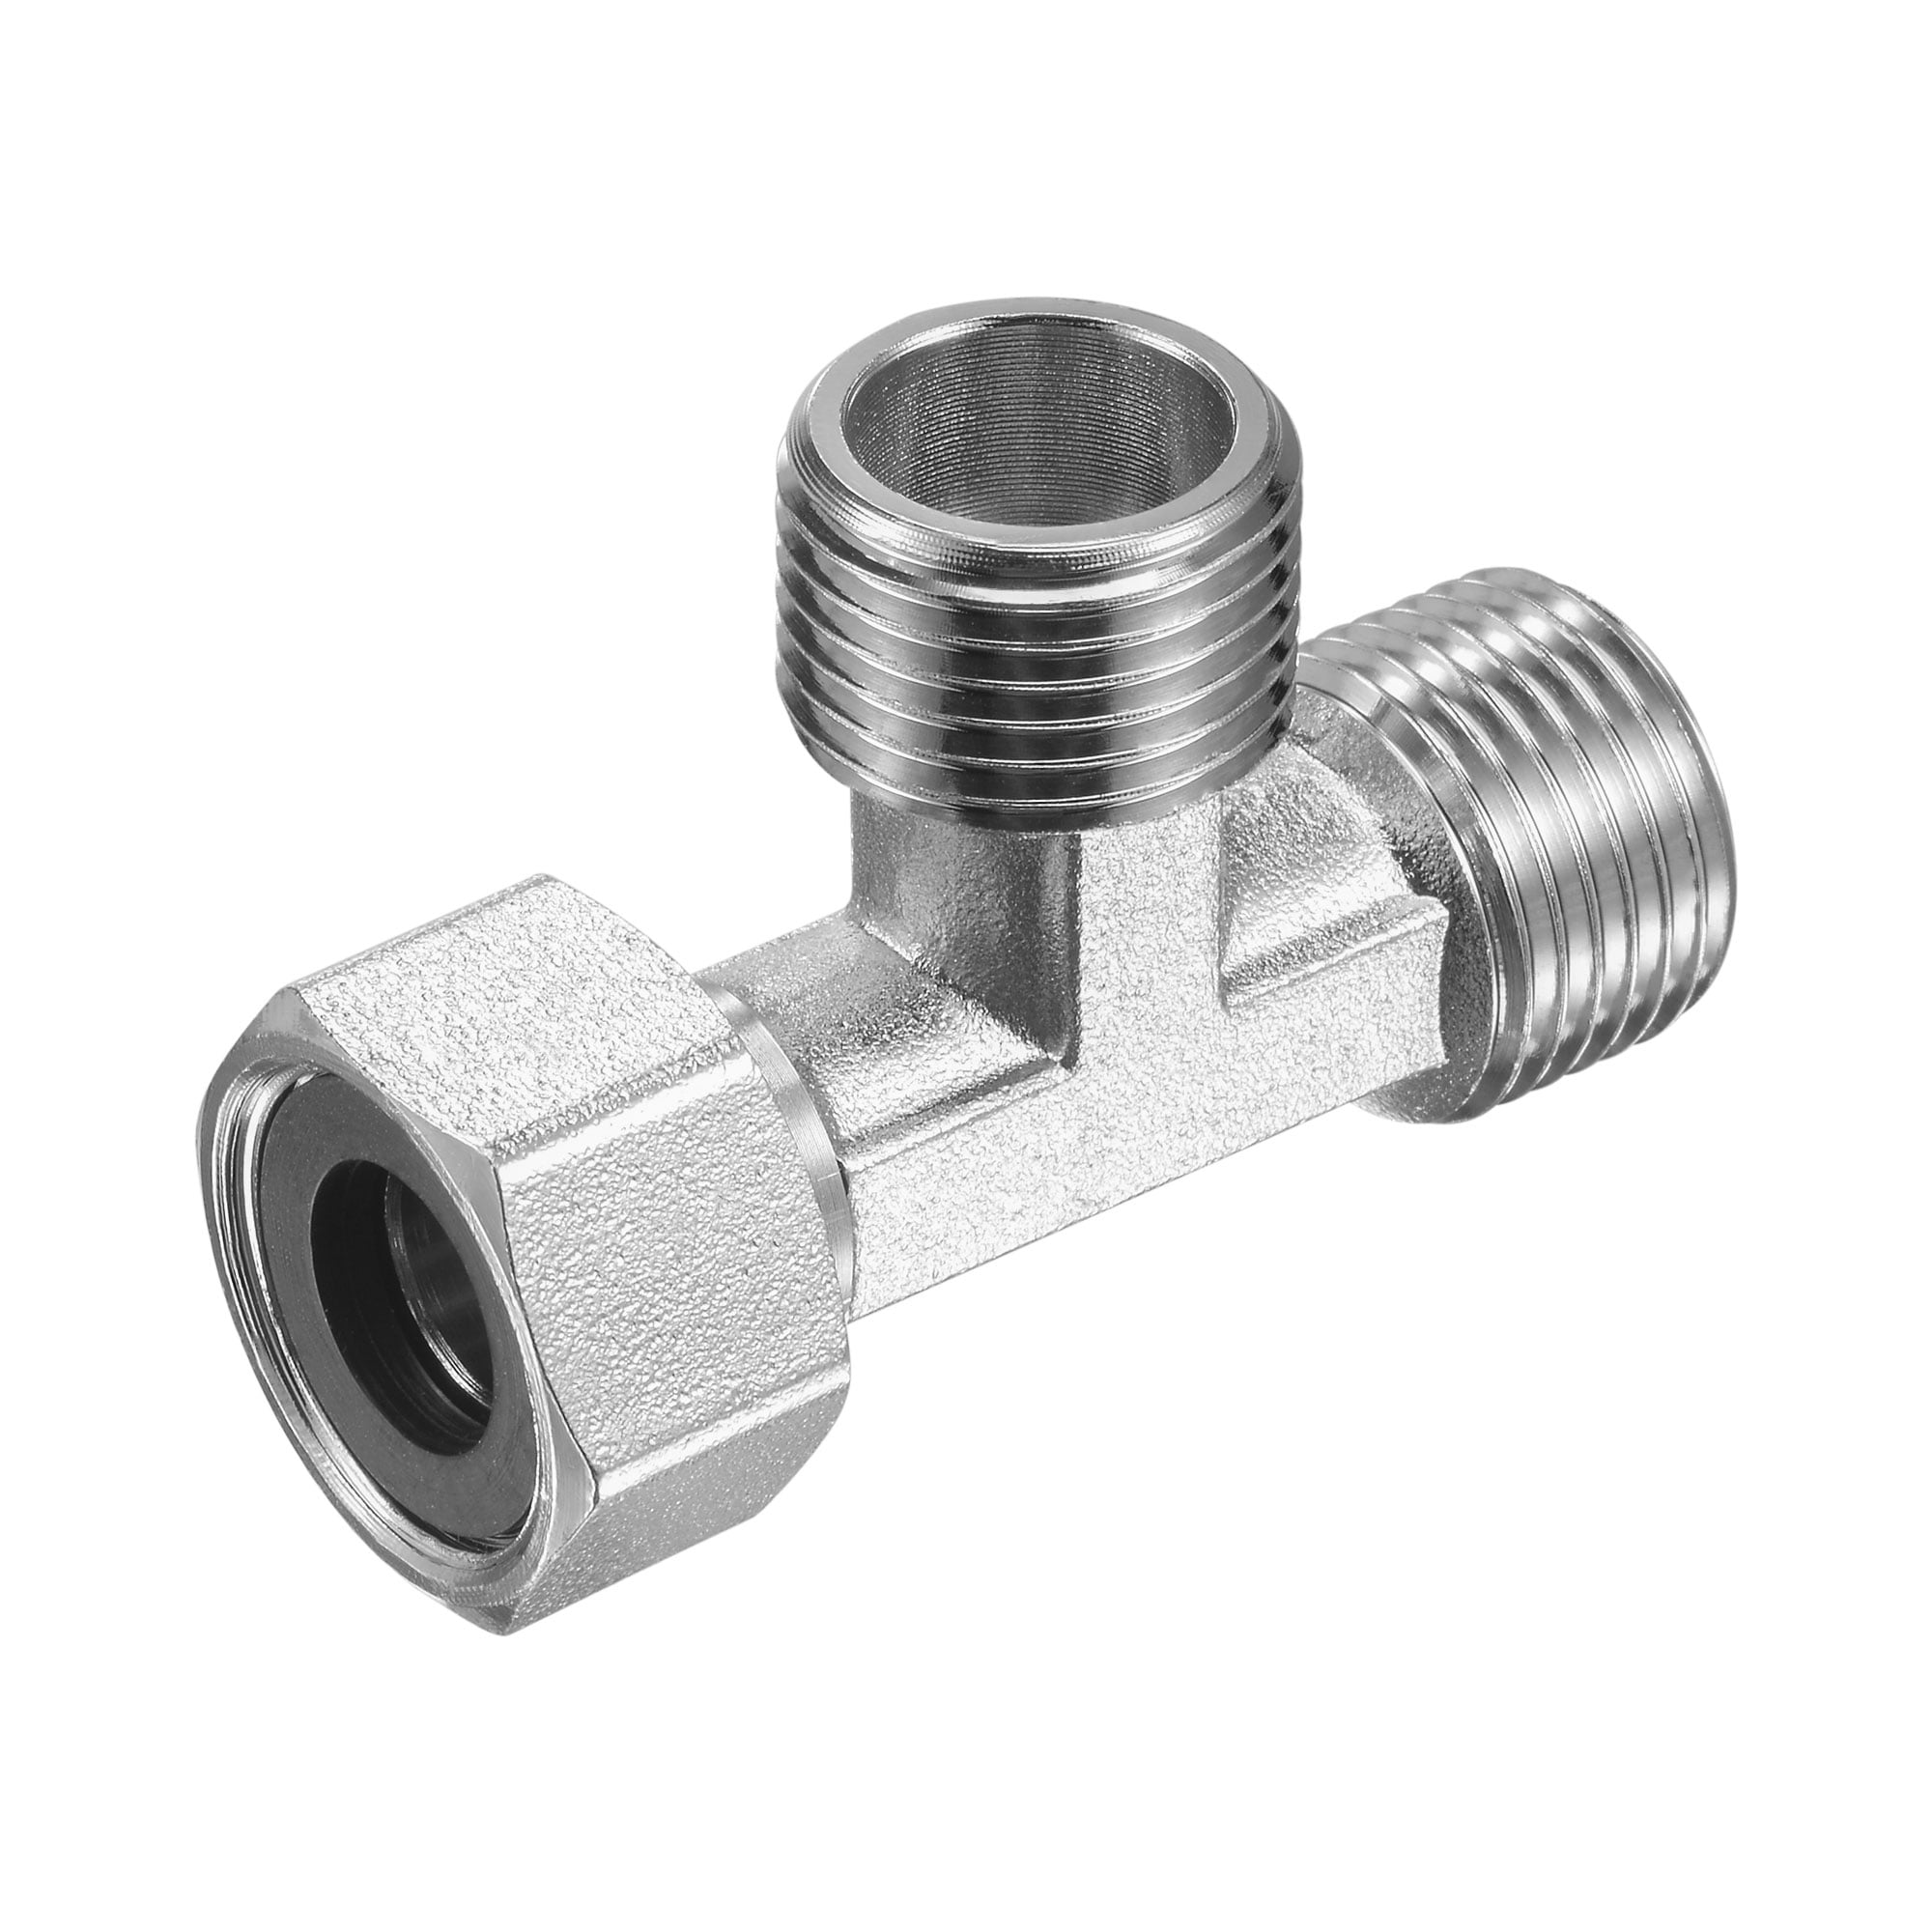 ADUCI 2pcs 1/8 1/4 3 Way Brass Hose Tube Fitting Female and Male Run Tee Joint with NPT Thread Size : 1/4 